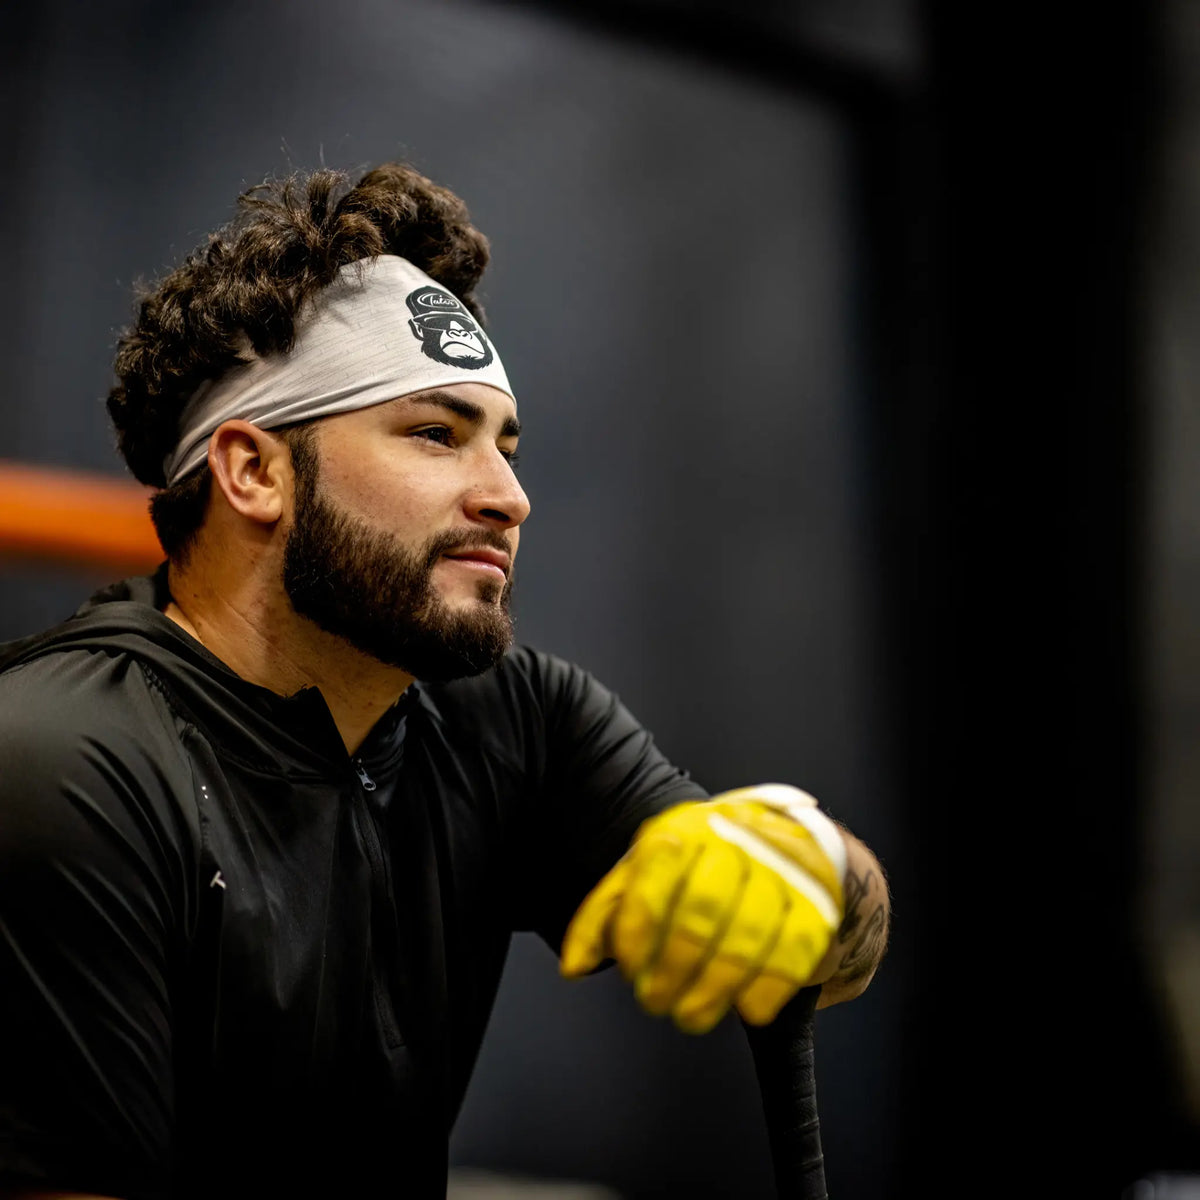 Baseball player in a focused stance wearing a Tater Kong headband and yellow batting gloves during a batting practice session, exuding confidence and concentration.